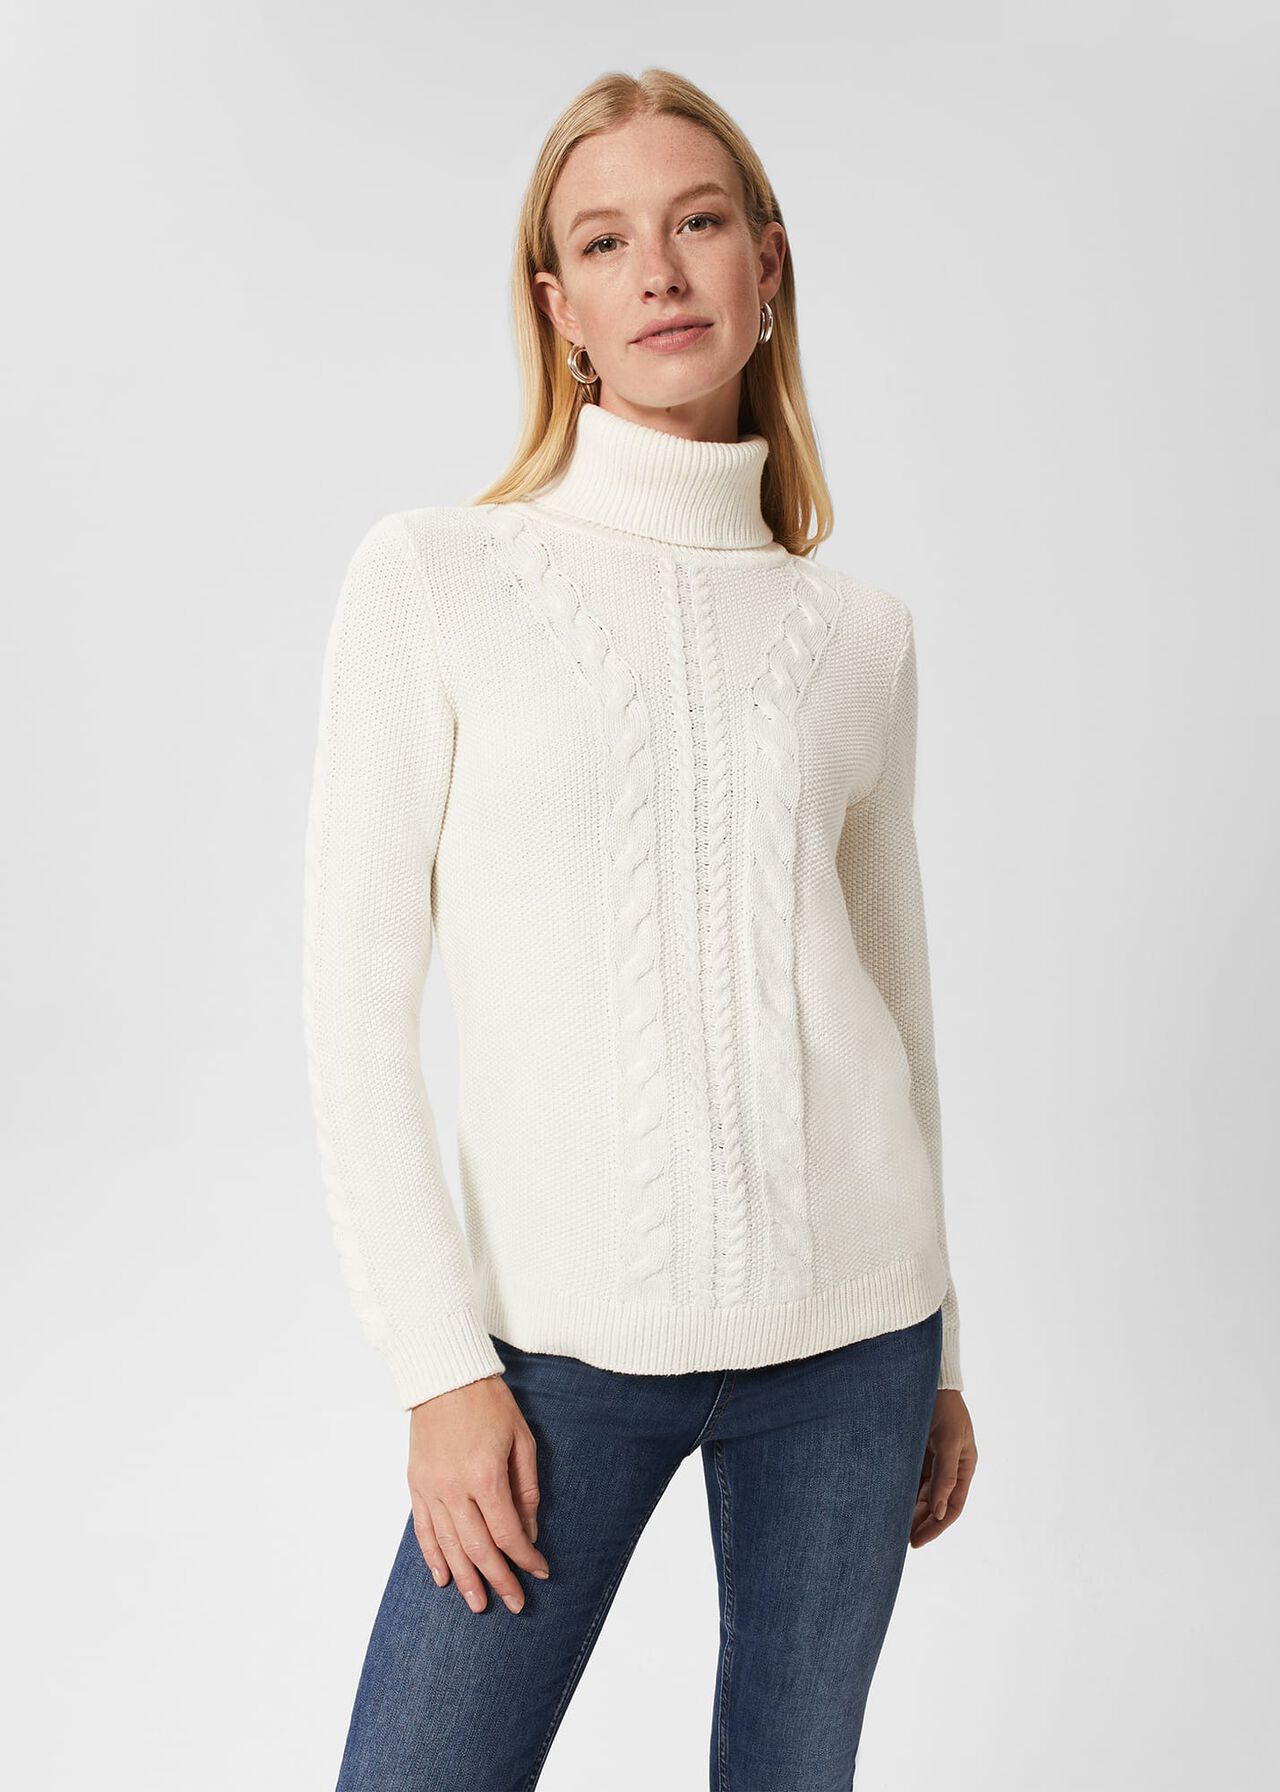 Nora Cable Sweater, Ivory, hi-res